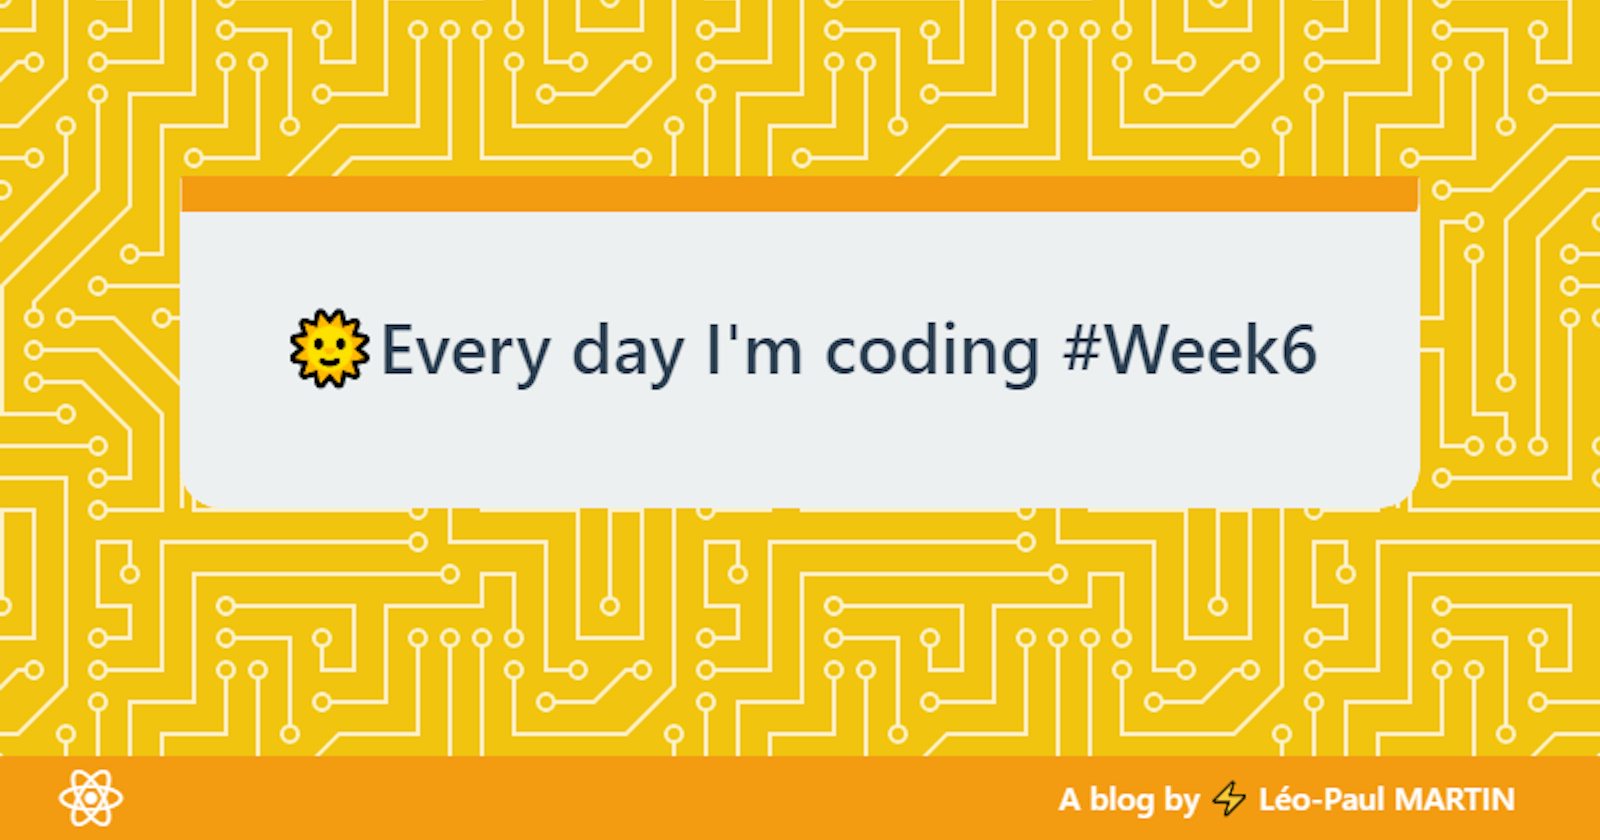 🌞 Every day I'm coding #Week6